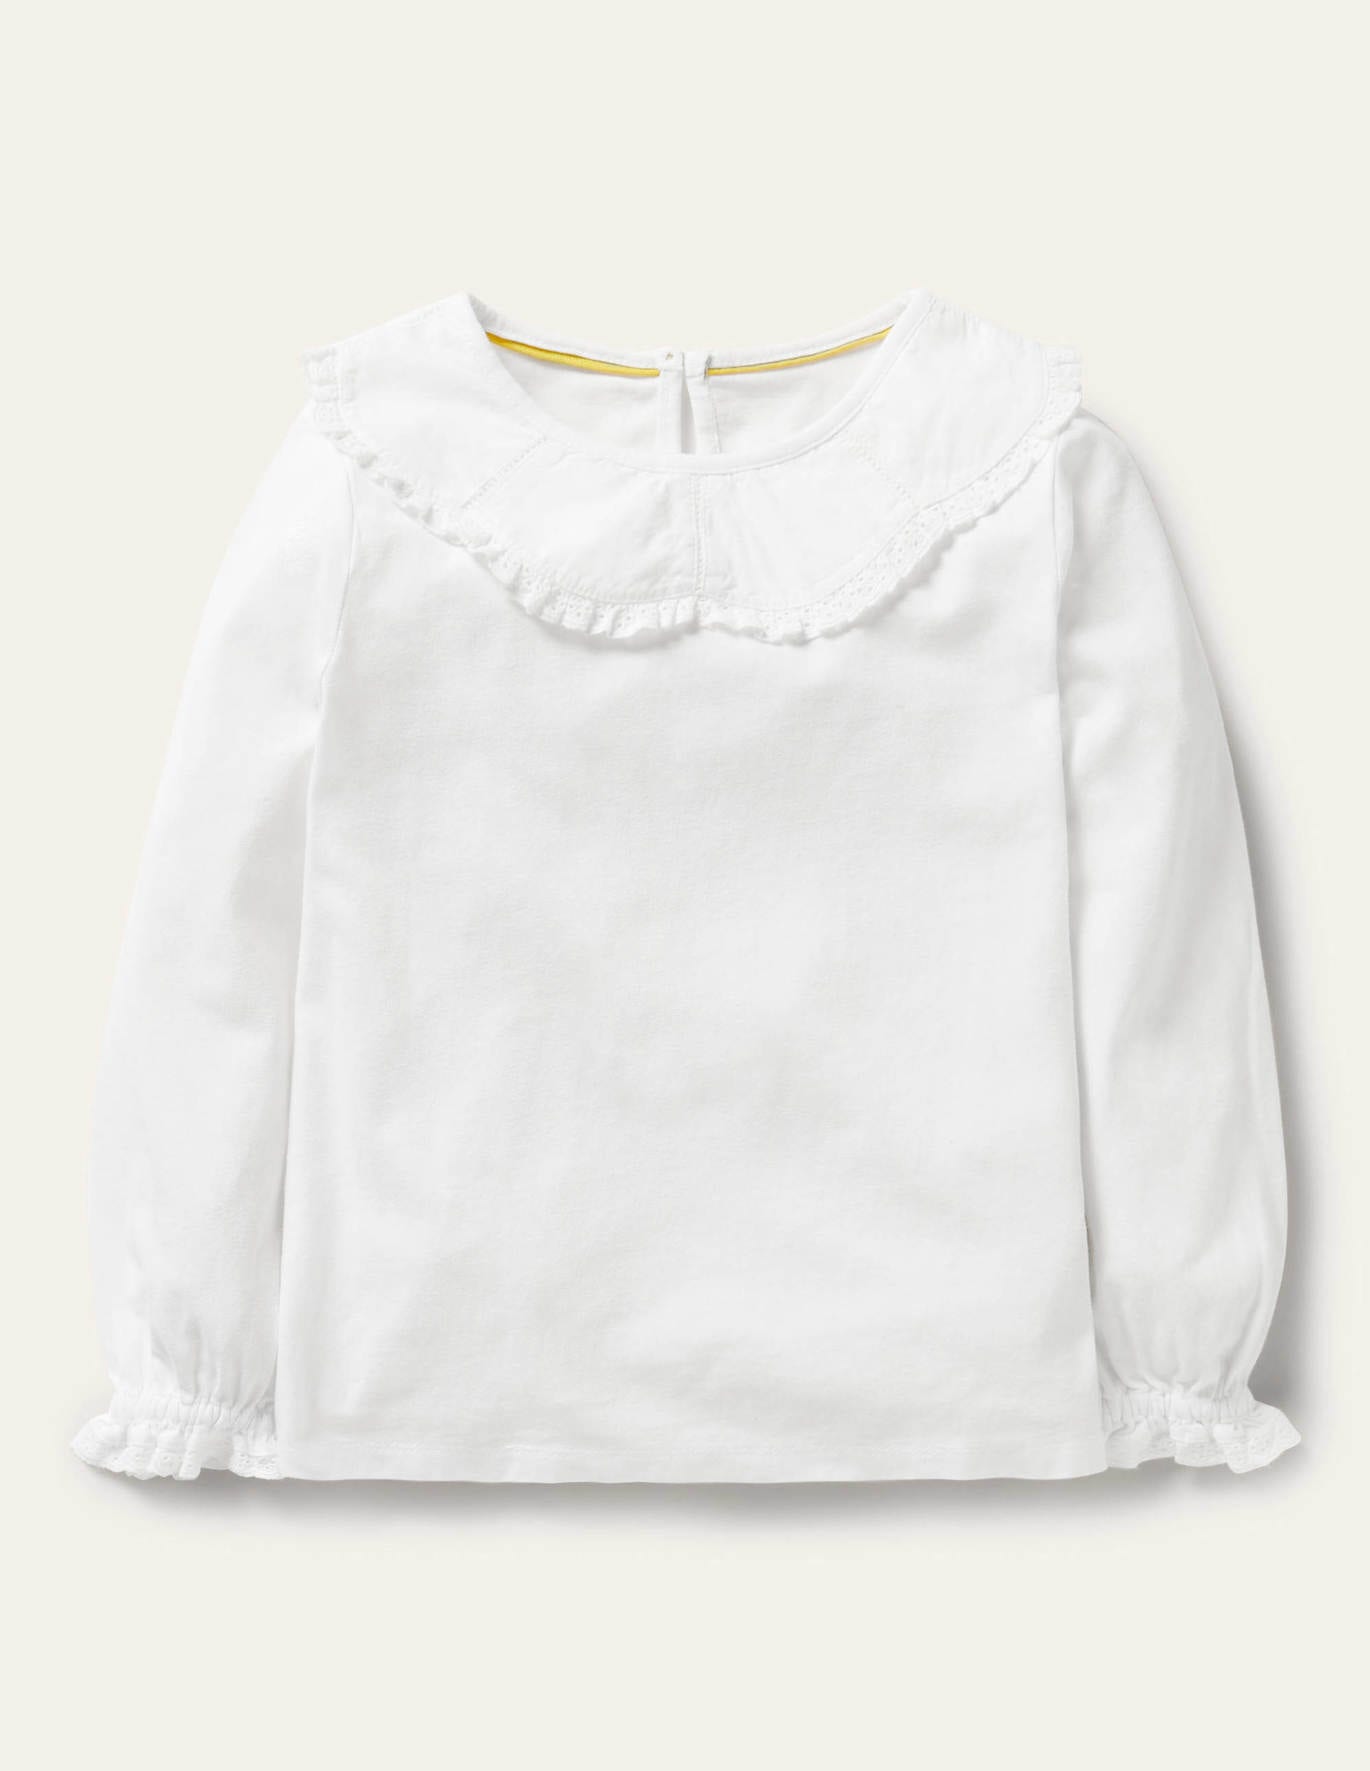 Boden Lace Collared Cotton Top - White